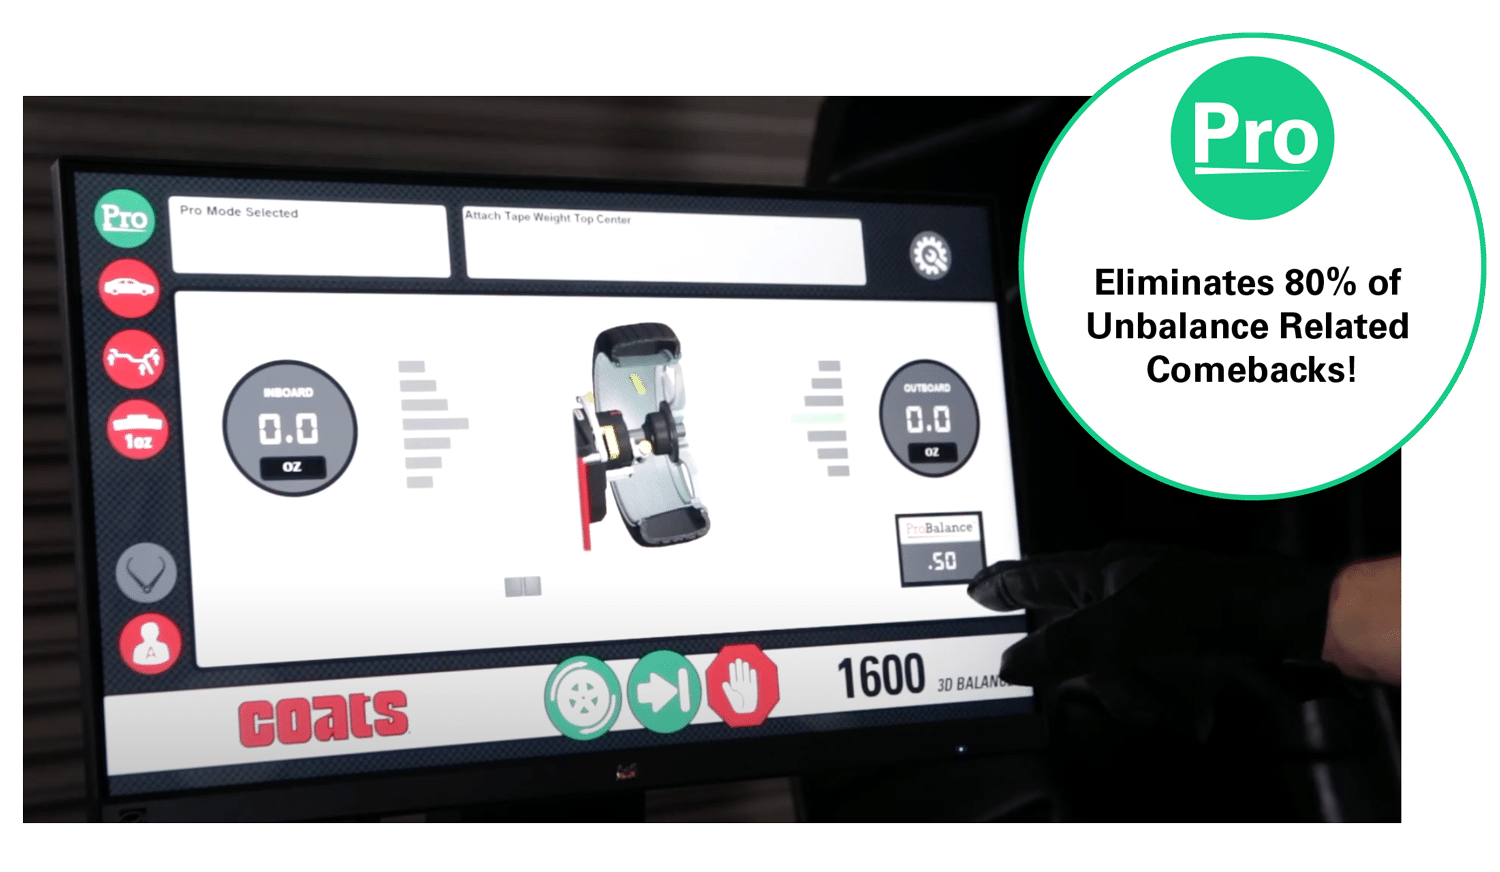 Full screen view of the 1600 3D Balancer touchscreen probalance technology with text graphic in the top right corner (Pro Eliminates 80% of Unbalanced Related Comebacks!)